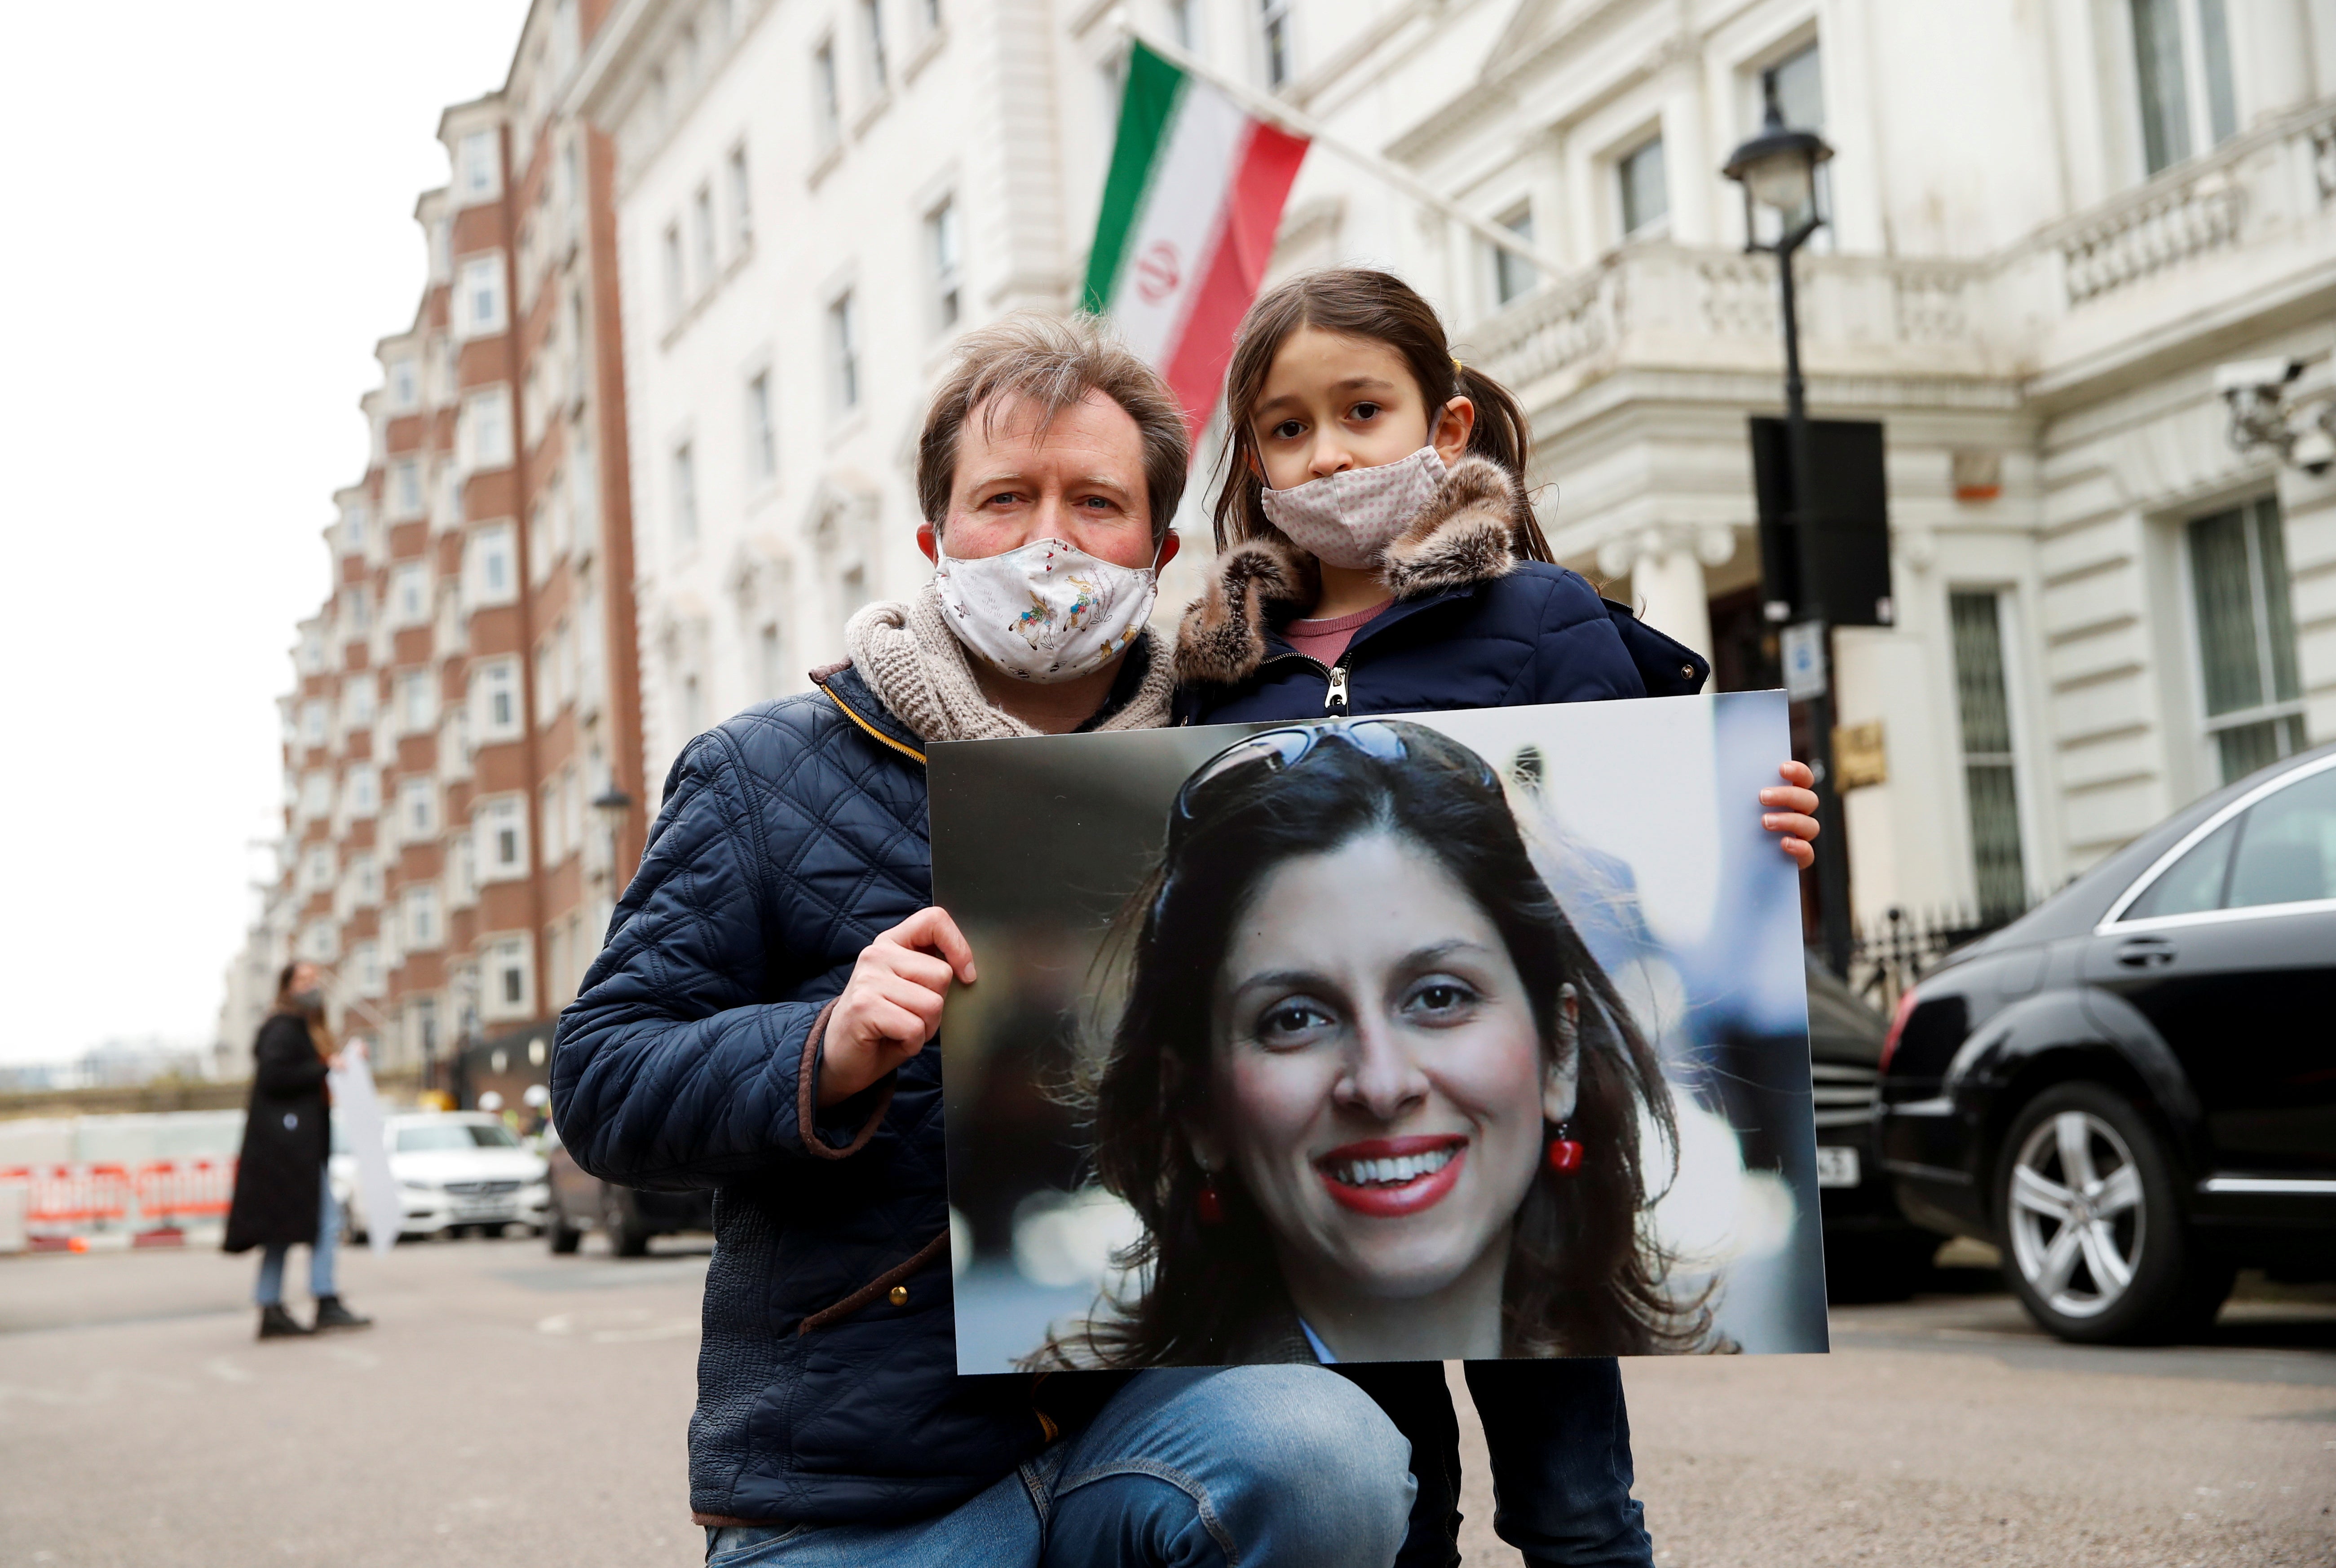 File image: Richard Ratcliffe, husband of British-Iranian aid worker Nazanin Zaghari-Ratcliffe, and their daughter Gabriella protest outside the Iranian Embassy in London